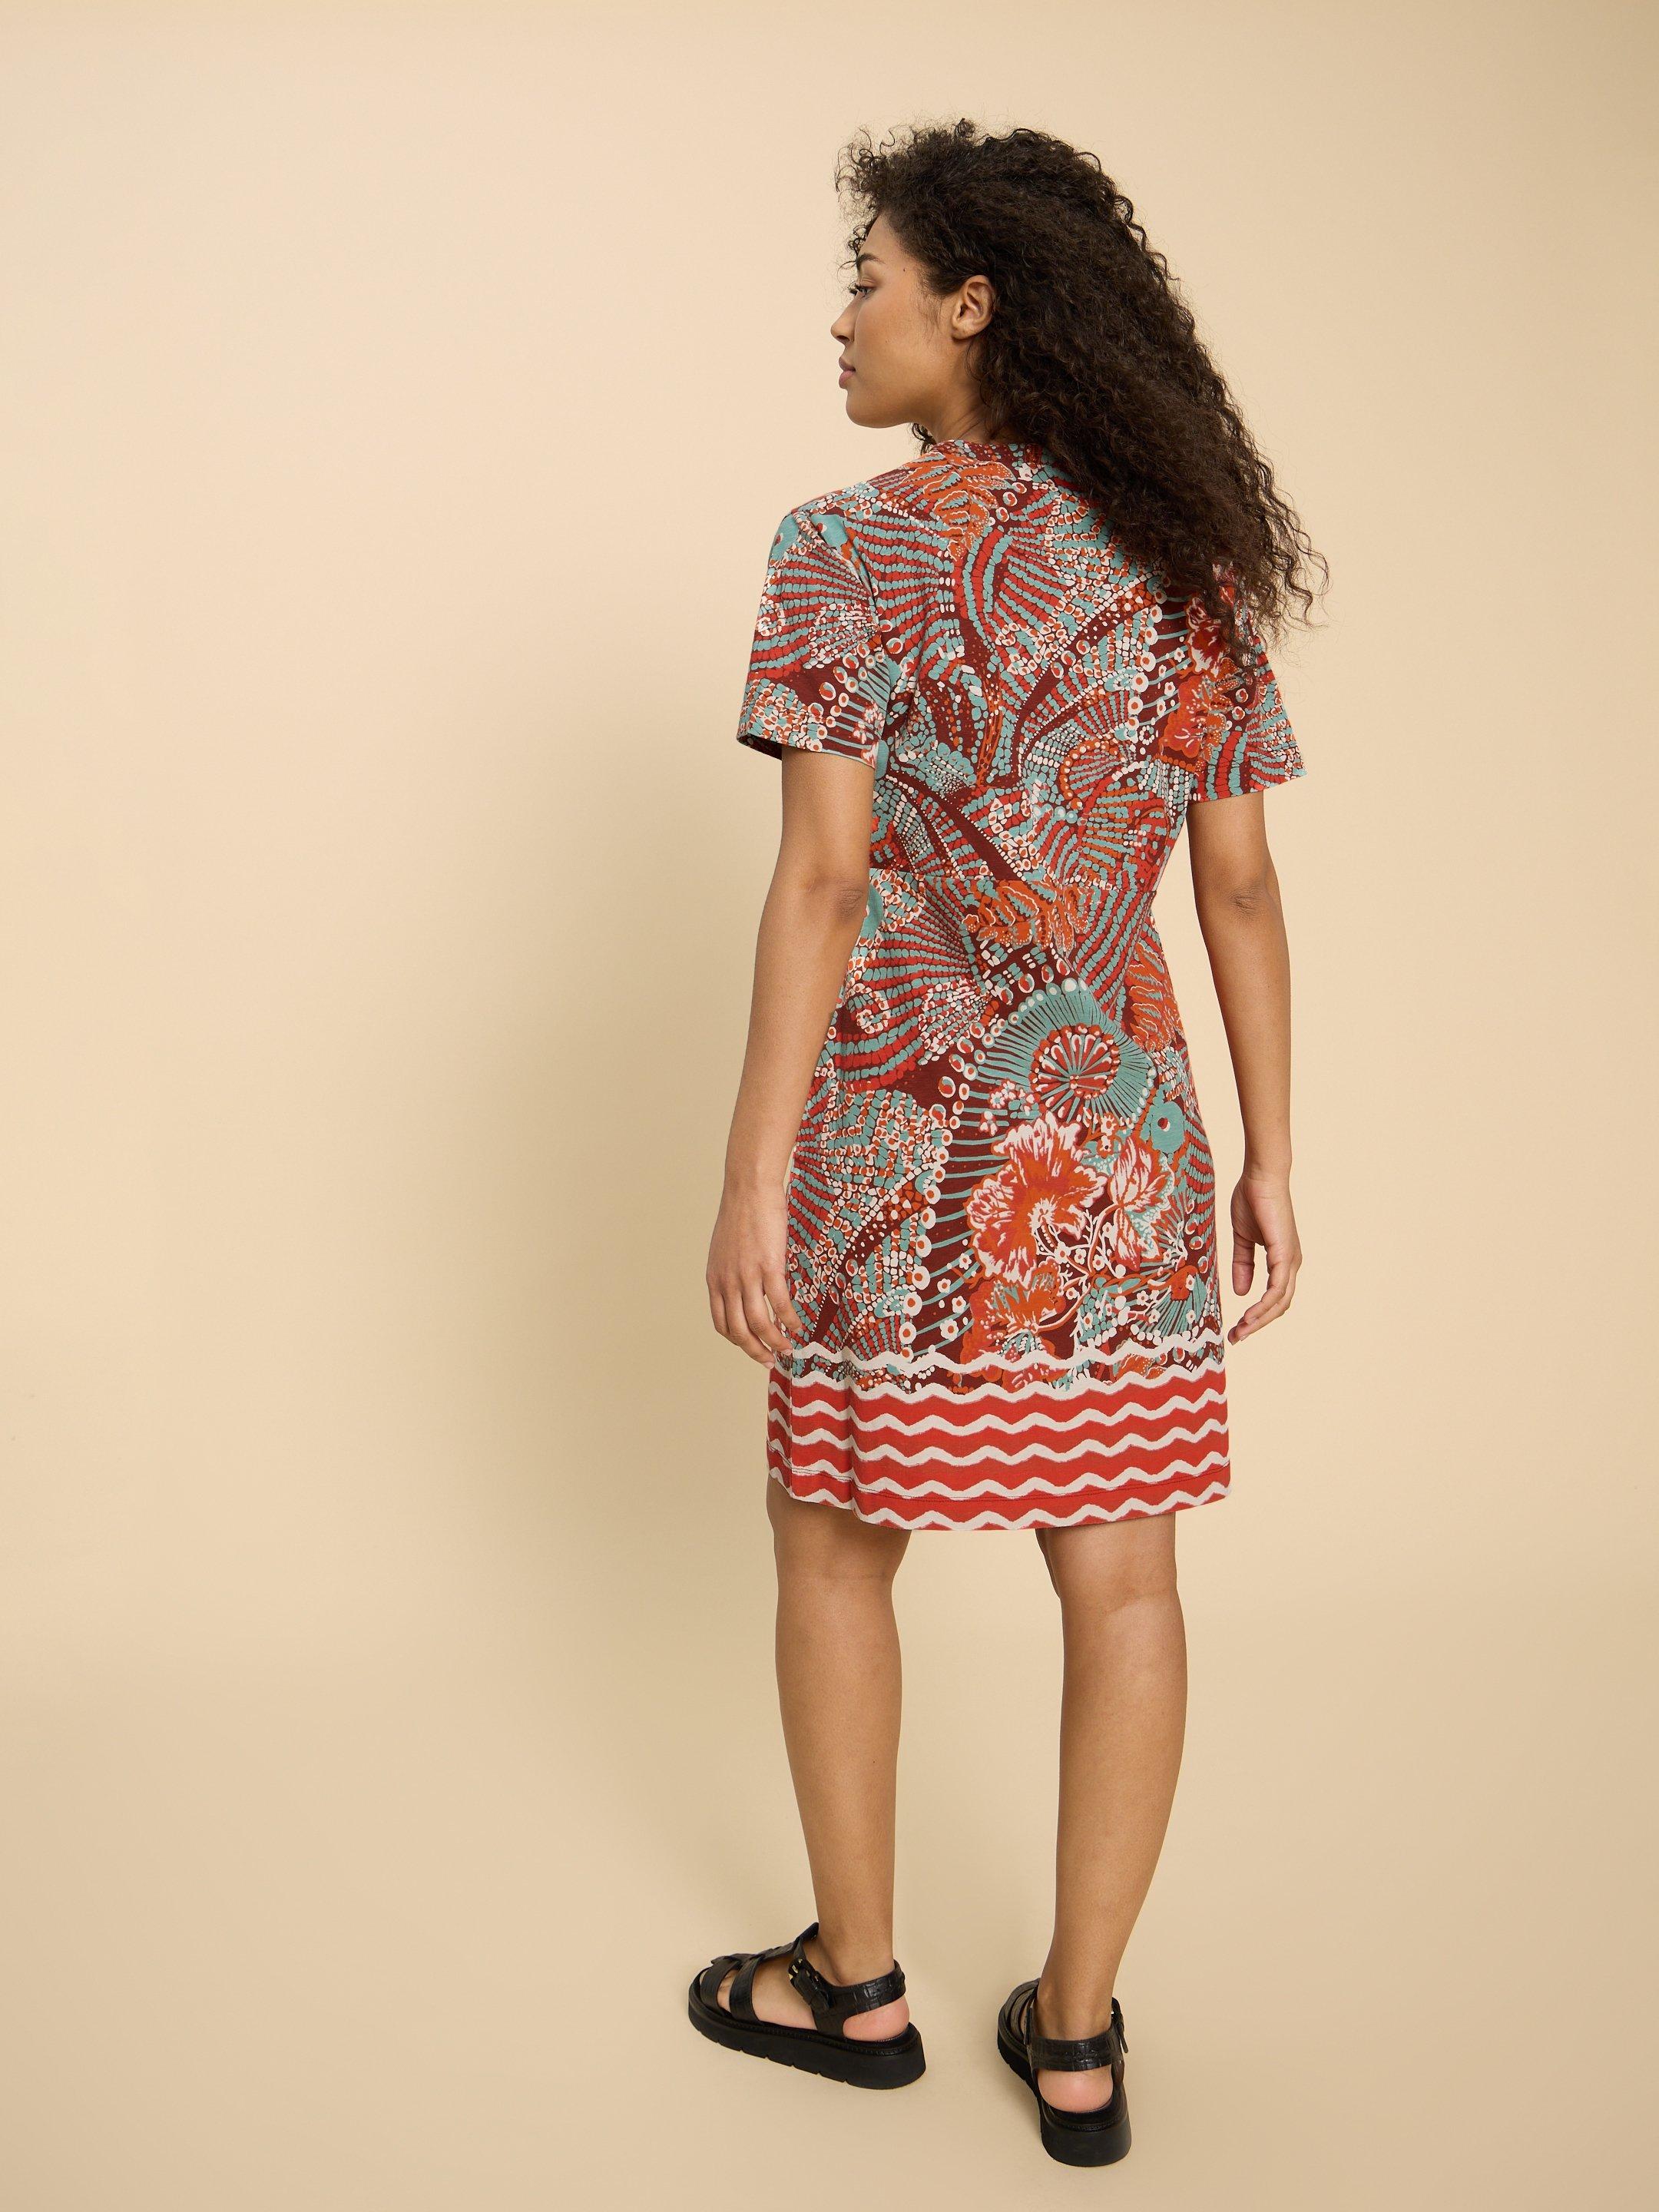 Tammy Cotton Printed Jersey Dress in RED PR - MODEL BACK